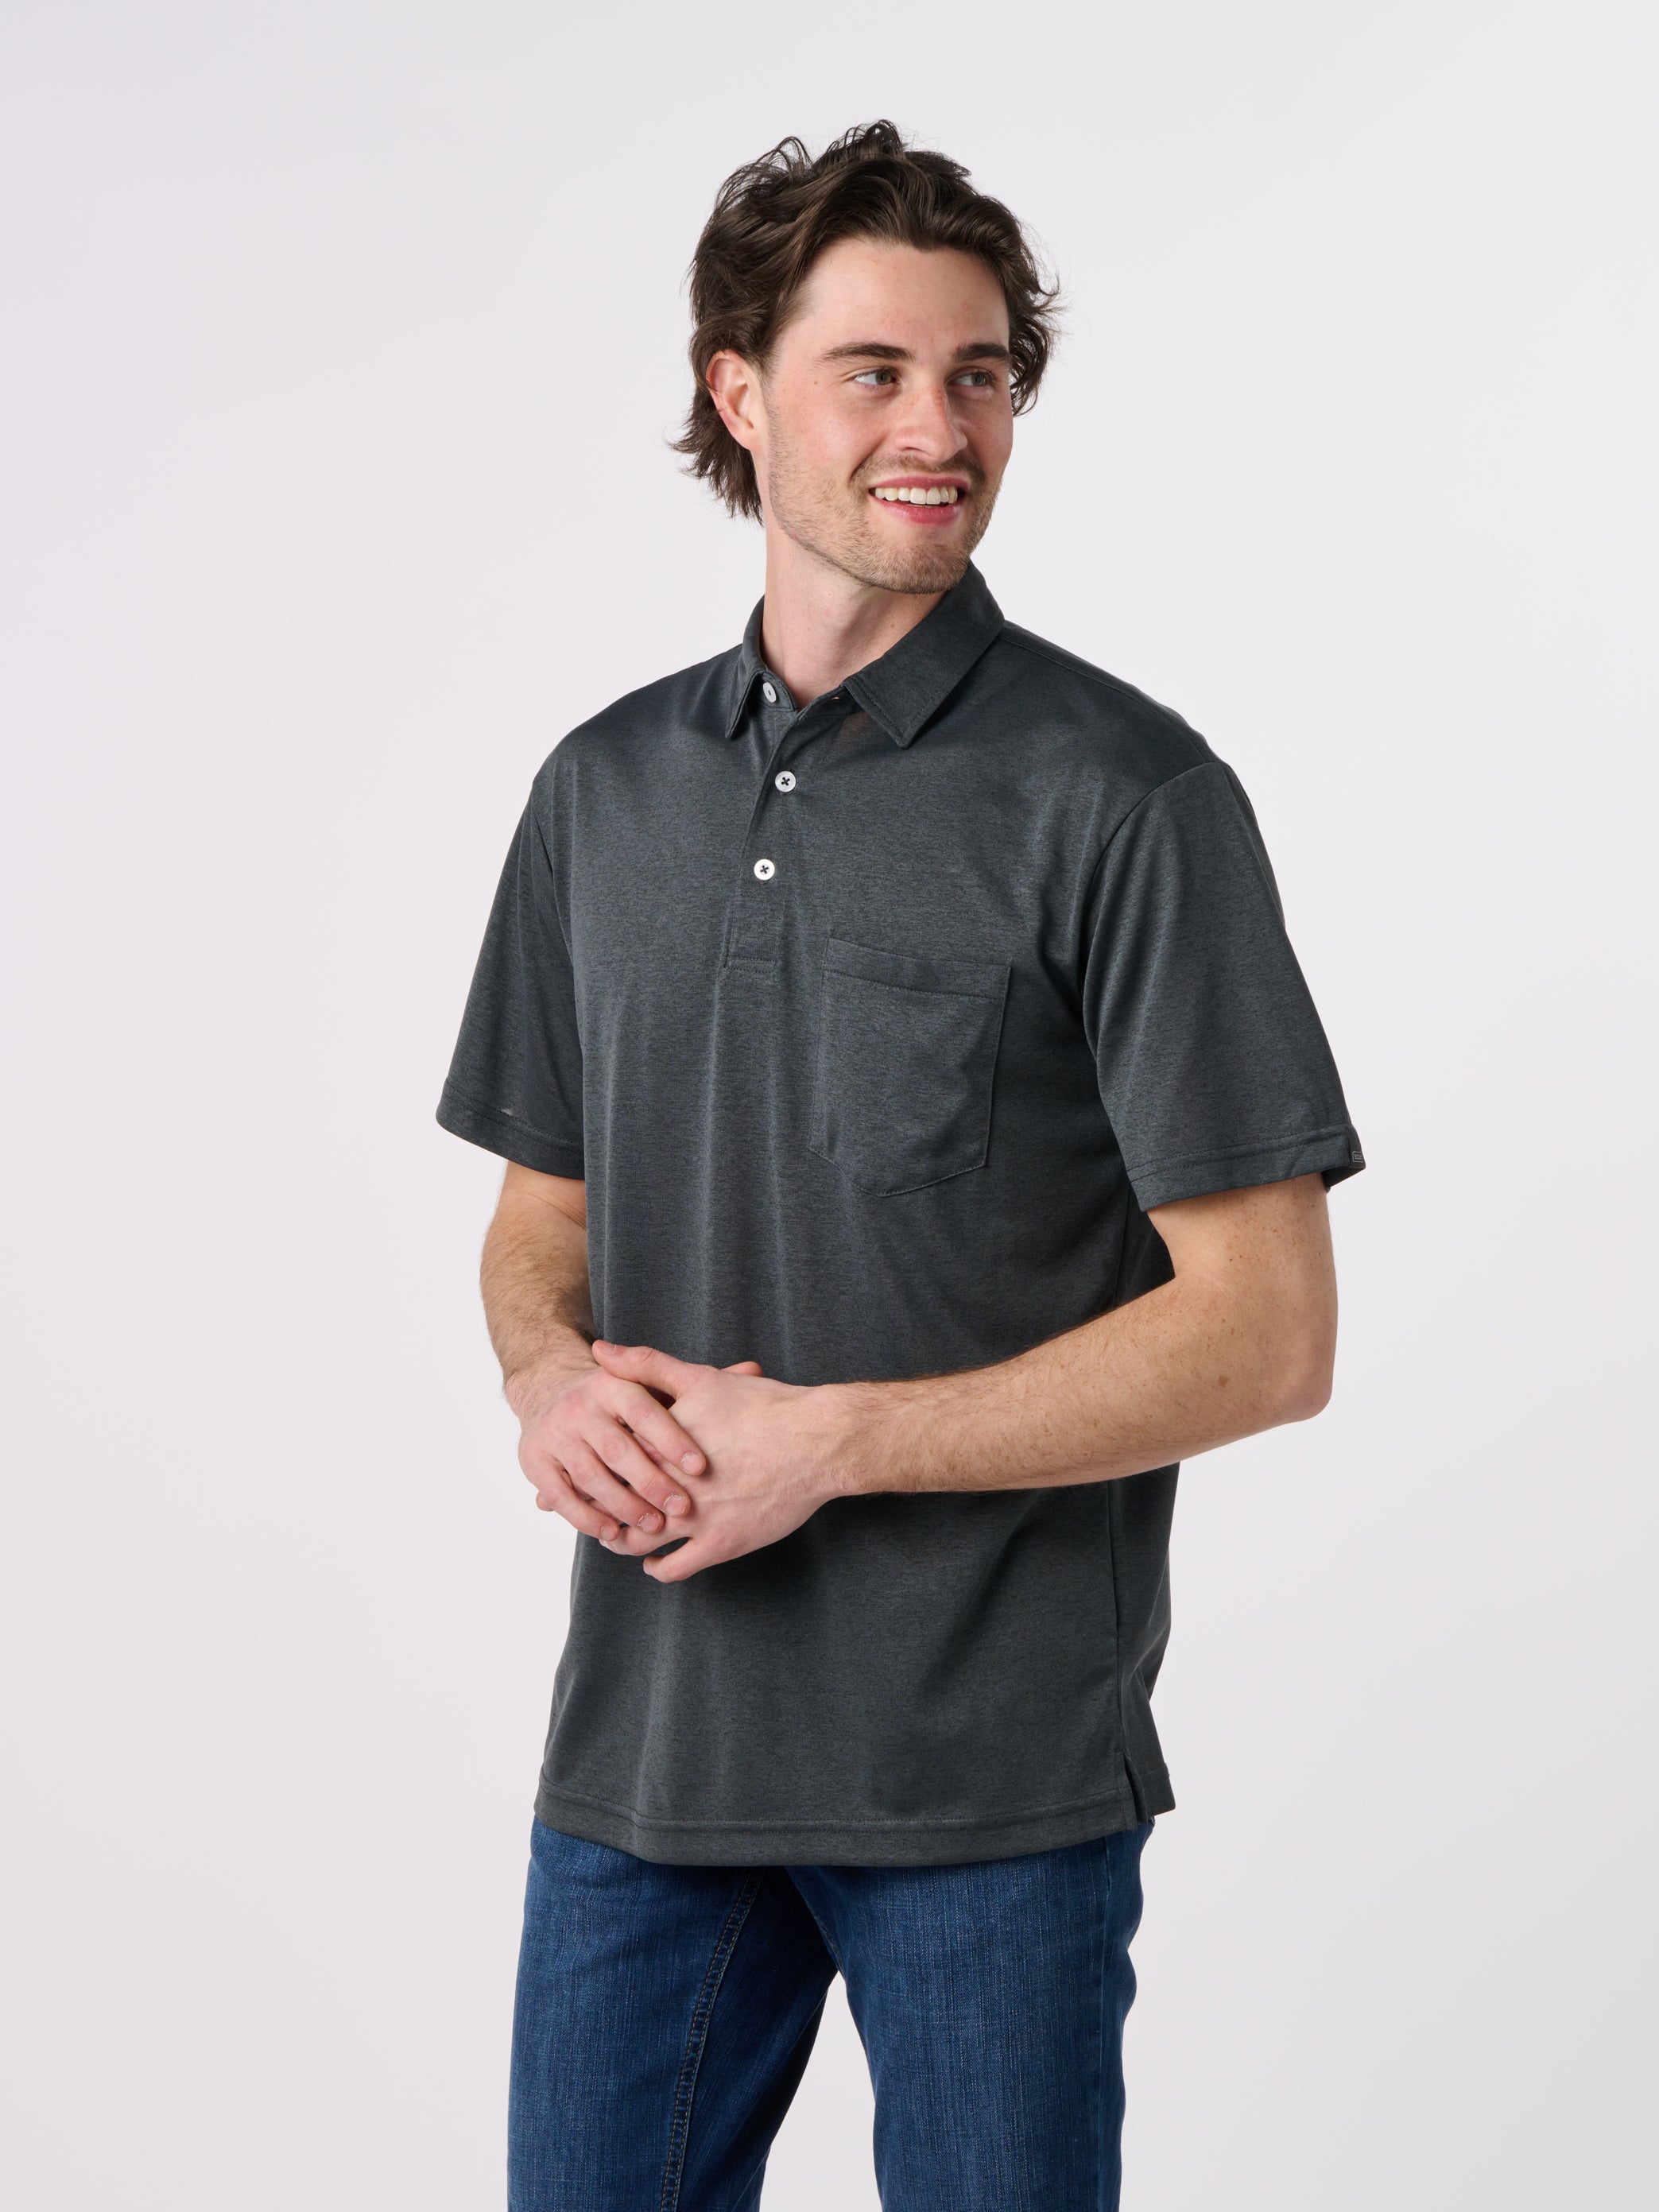 RECOVER_RD5000_SPORTPOLO_BLACKHEATHER_FRONT.jpg